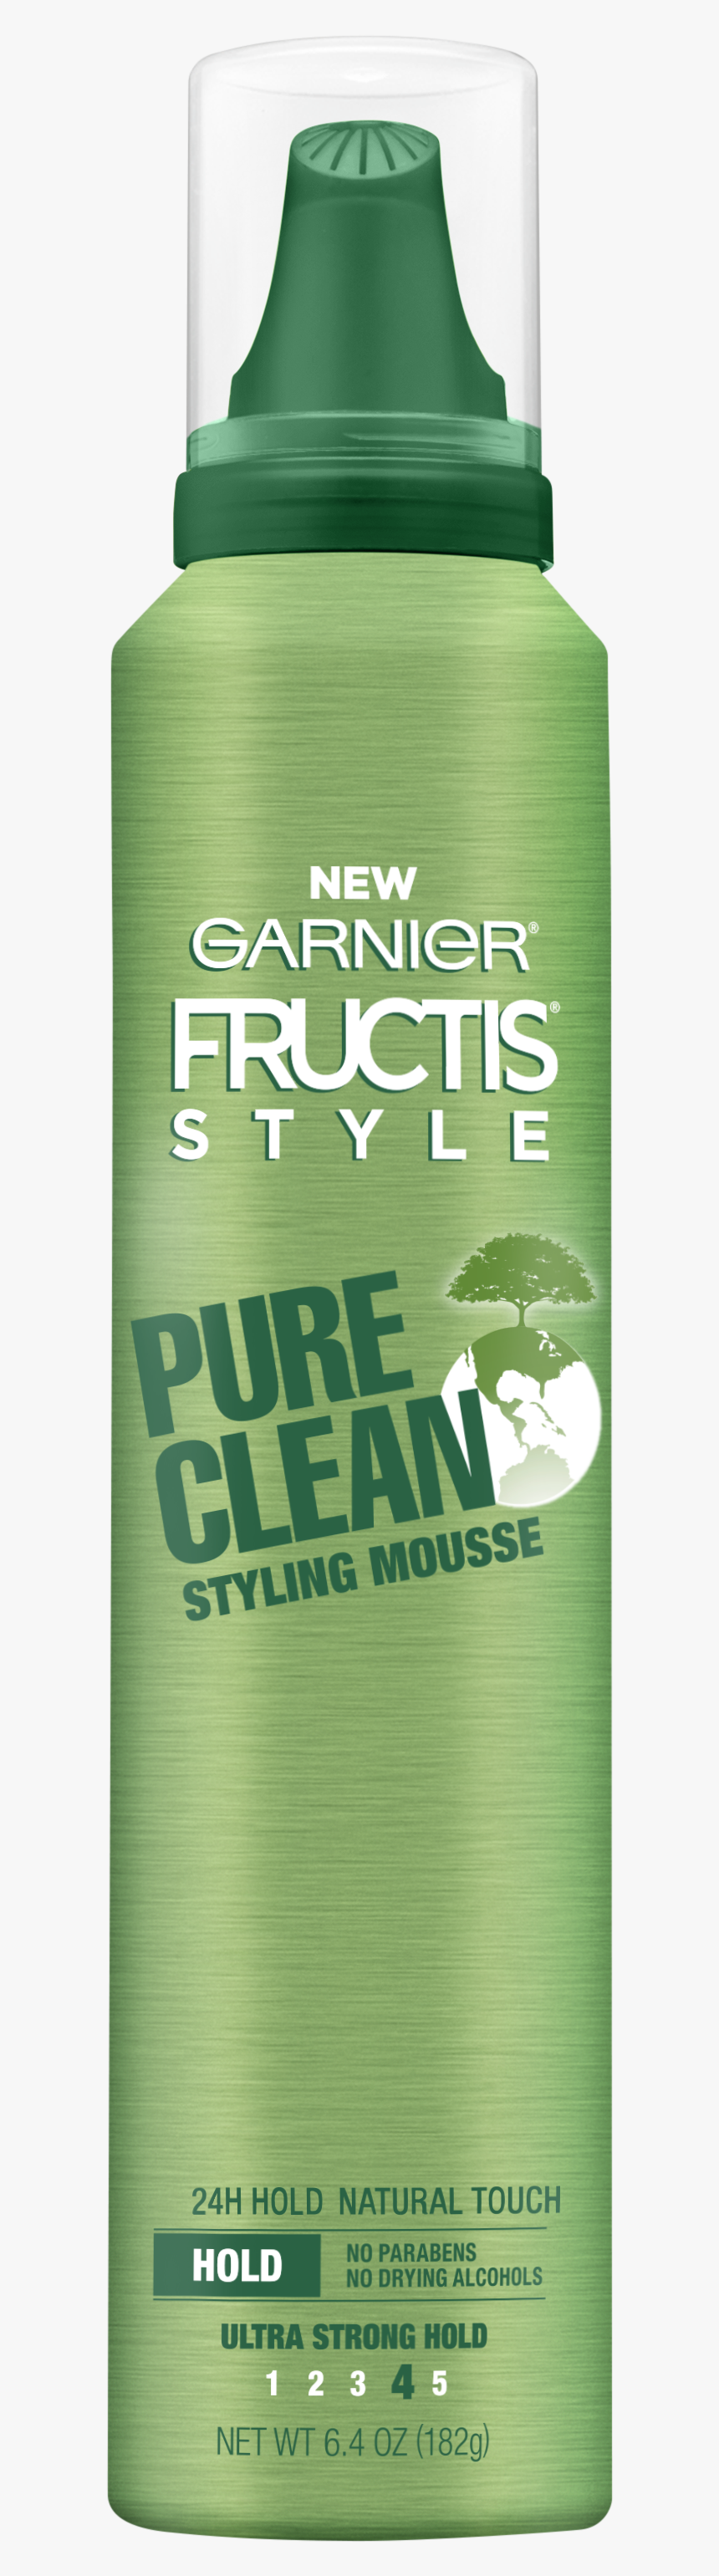 Garnier Fructis Style Pure Clean Styling Mousse - Poster, HD Png Download, Free Download